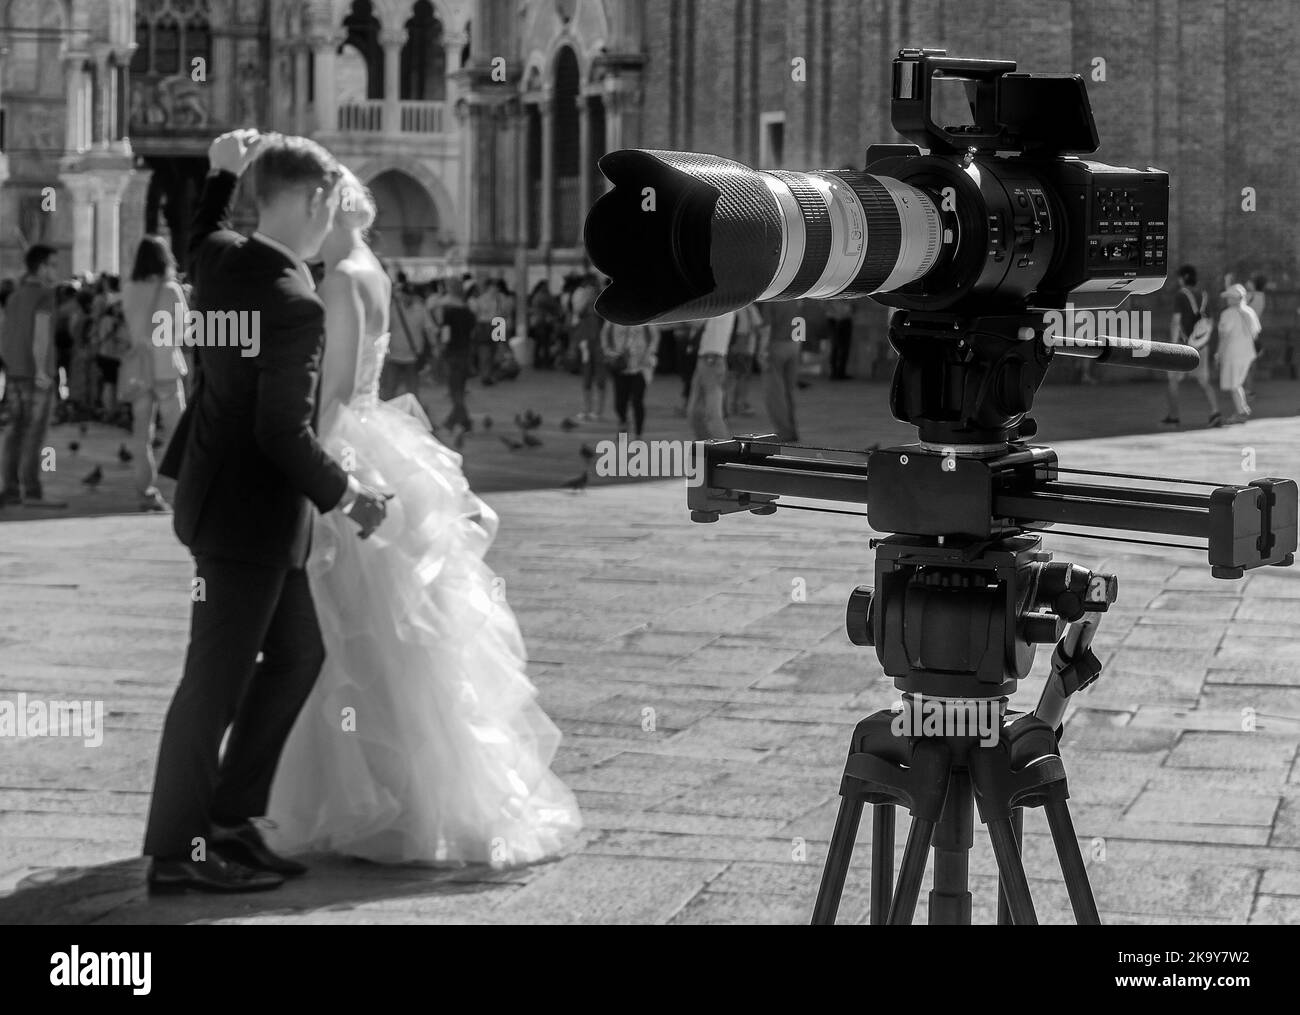 A young newlywed couple dances in Piazza San Marco, Venice, Italy, filmed by a camera, in black and white Stock Photo